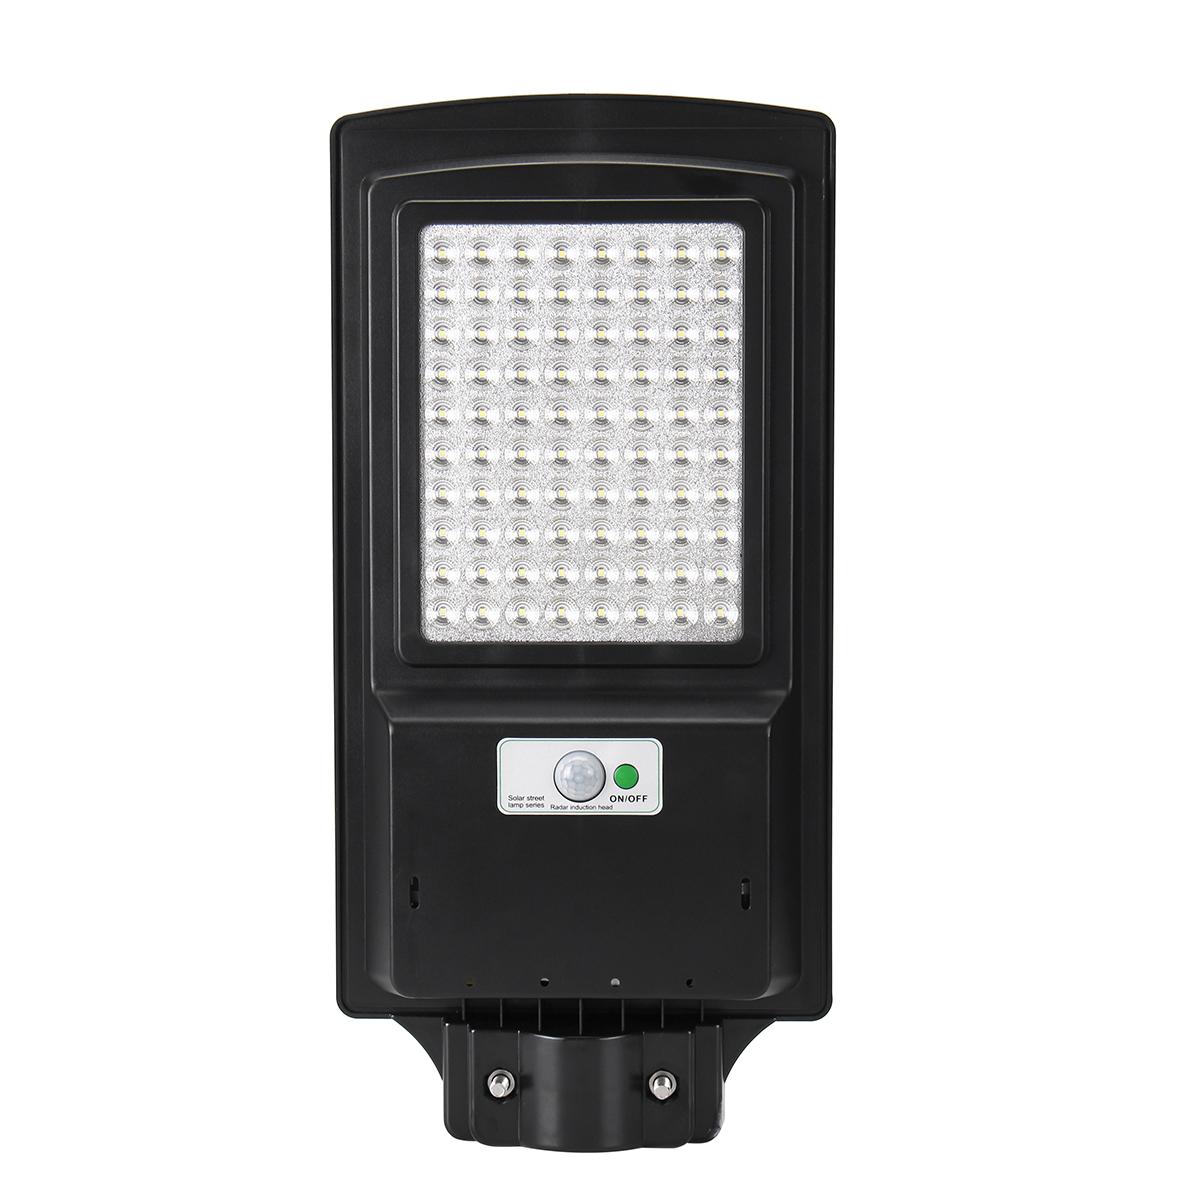 2347CM-Waterproof-80-LED-Solar-Street-Light-120-Degree-With-Remote-Control-1622330-1